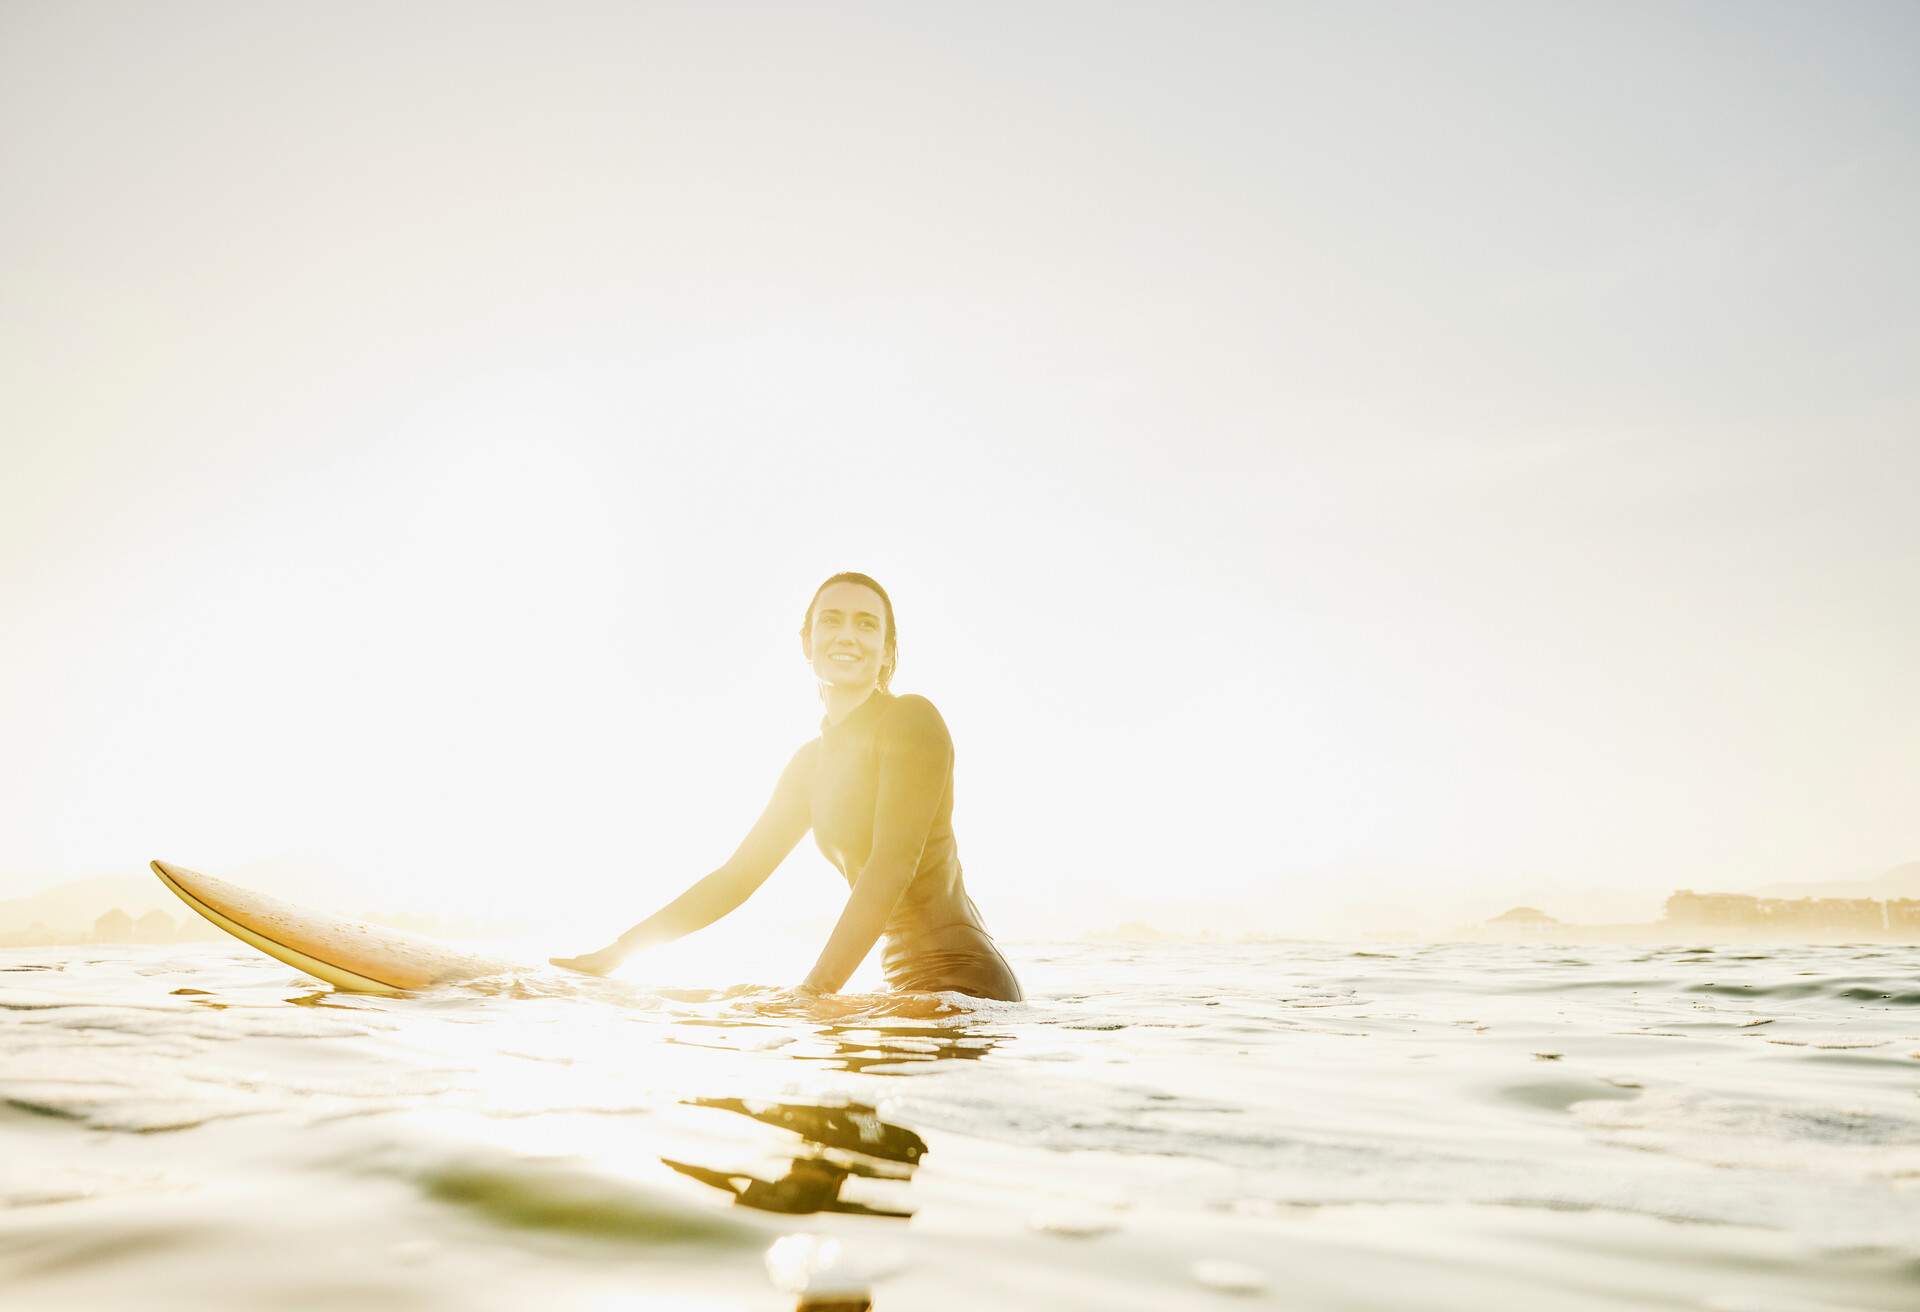 Wide shot portrait of smiling female surfer sitting on surfboard in ocean while waiting for wave during early morning surf session